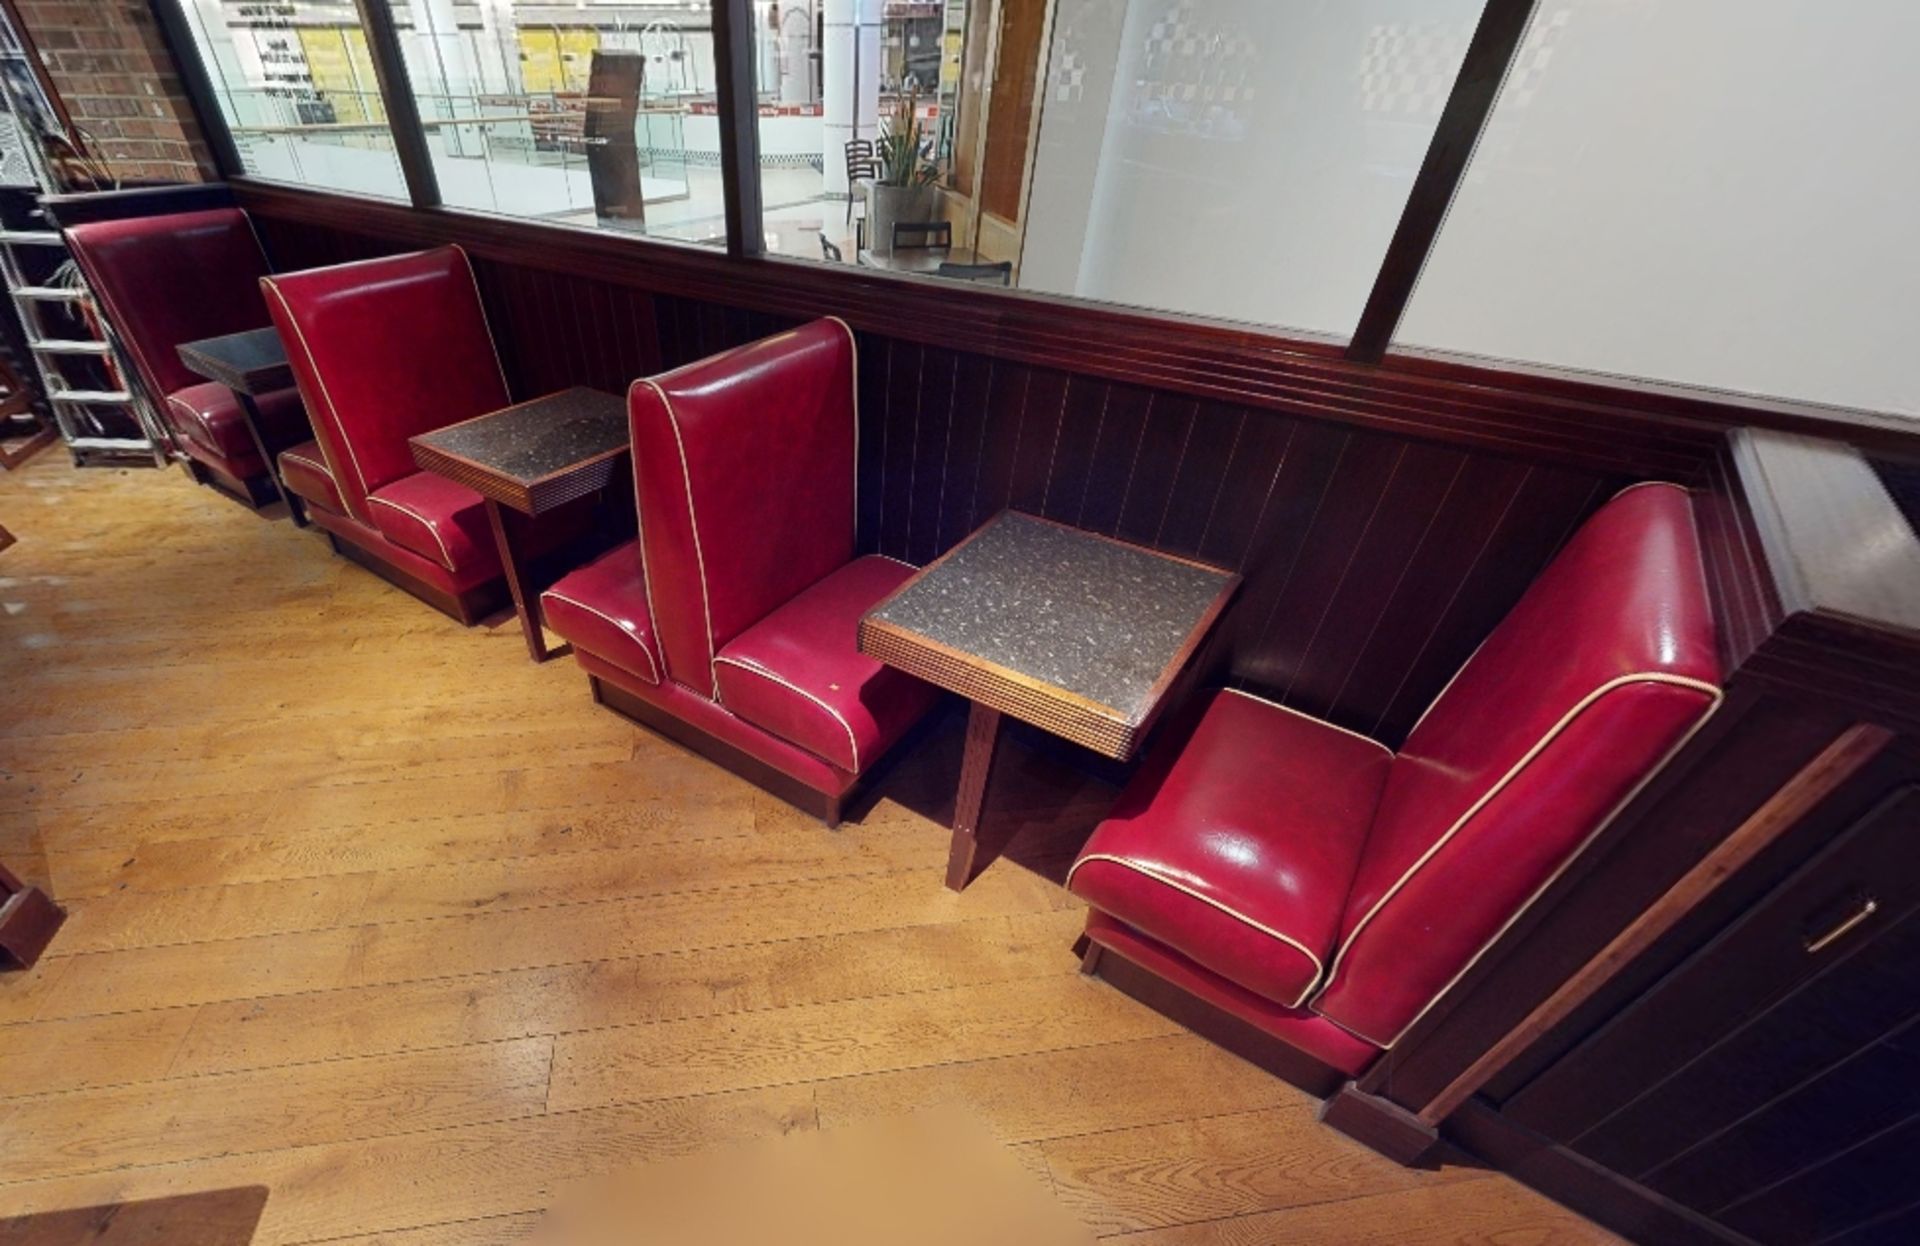 Large Collection of Restaurant Seating Benches and Tables From a Popular 1950's Inspired Italian- - Image 3 of 7